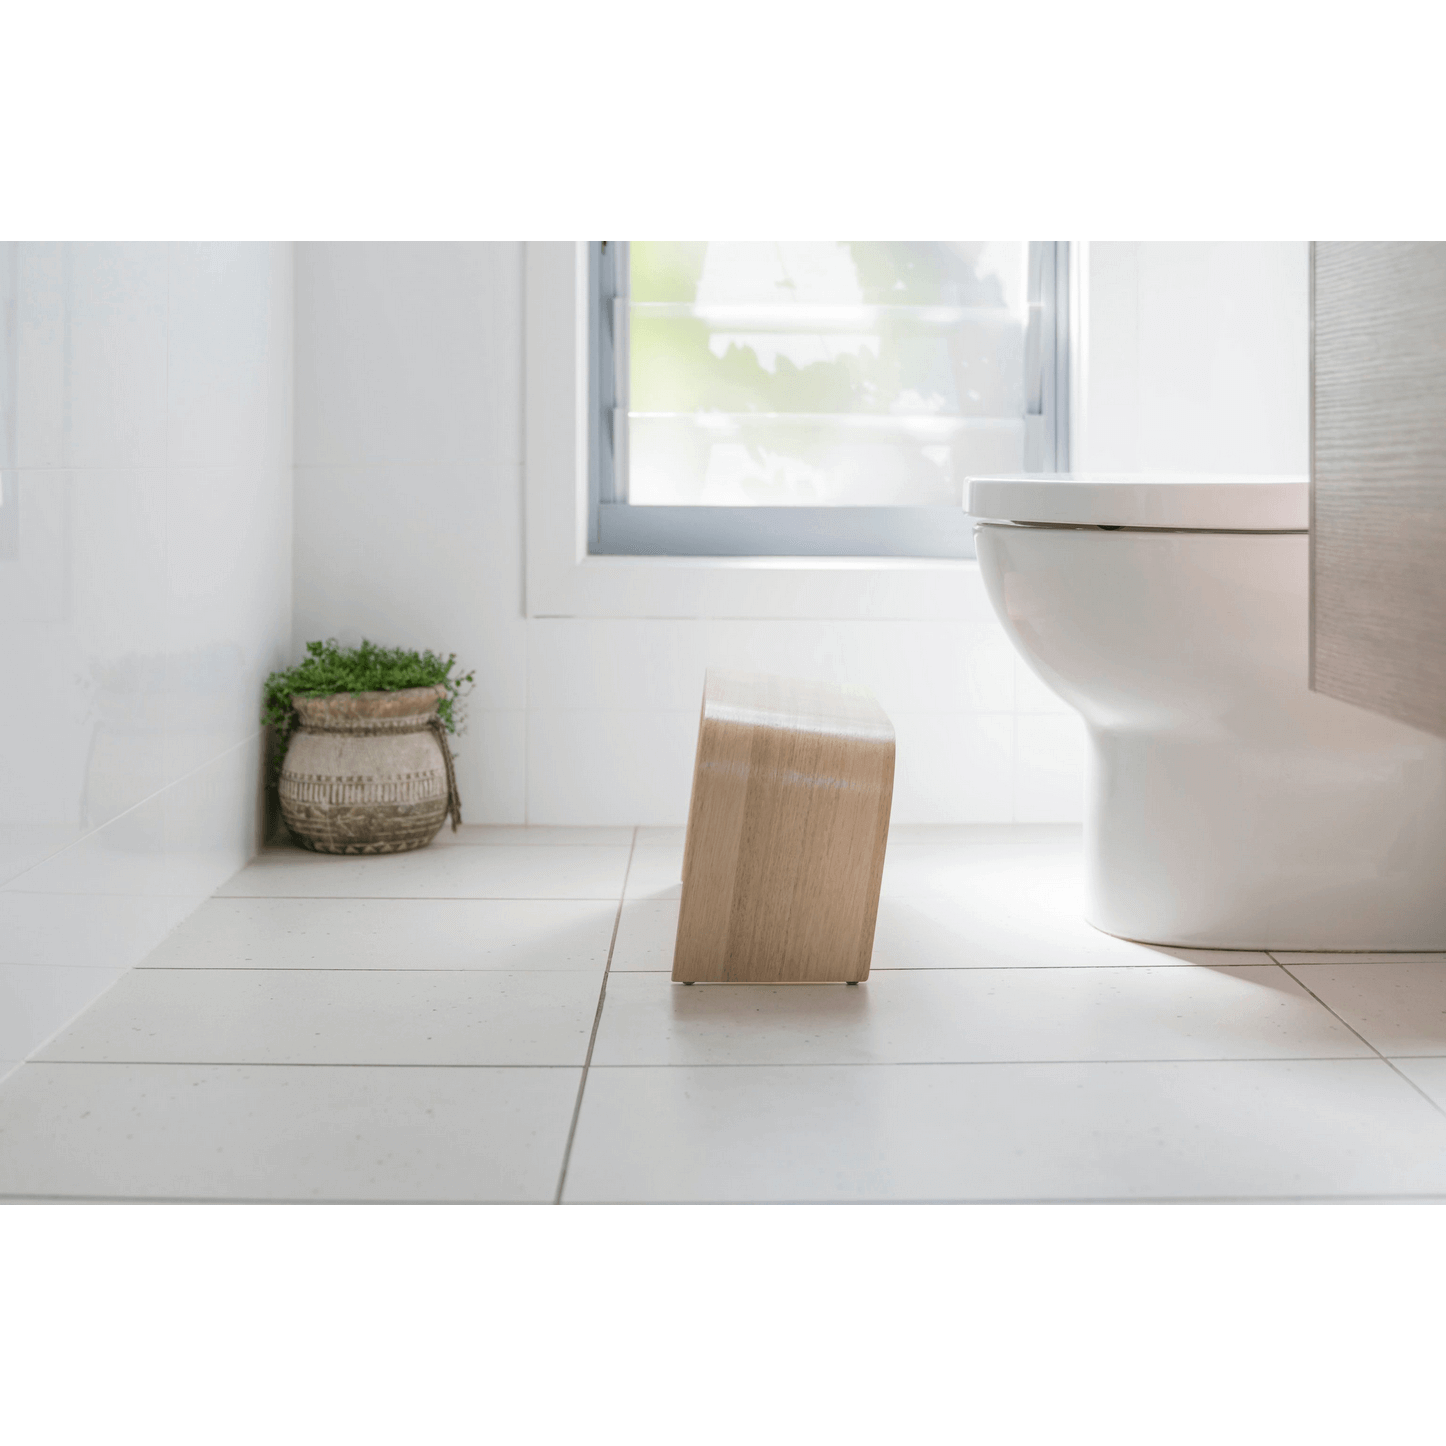 The PROPPR Timber - Whitewash Toilet Foot Stool - side view in a bathroom